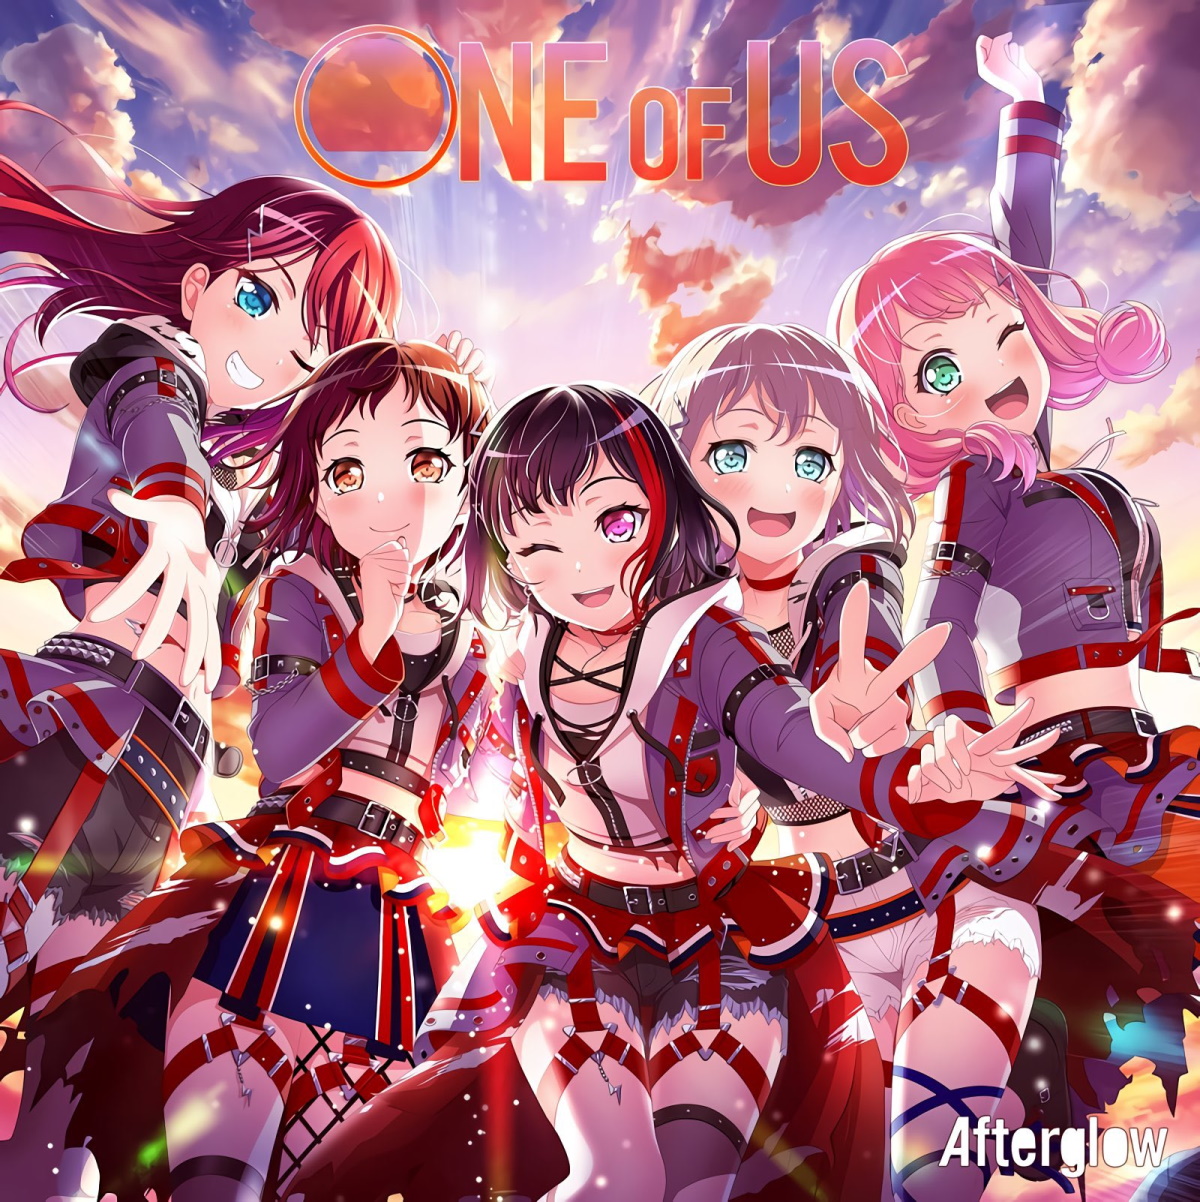 『Afterglow - ON YOUR MARK』収録の『ON YOUR MARK』ジャケット